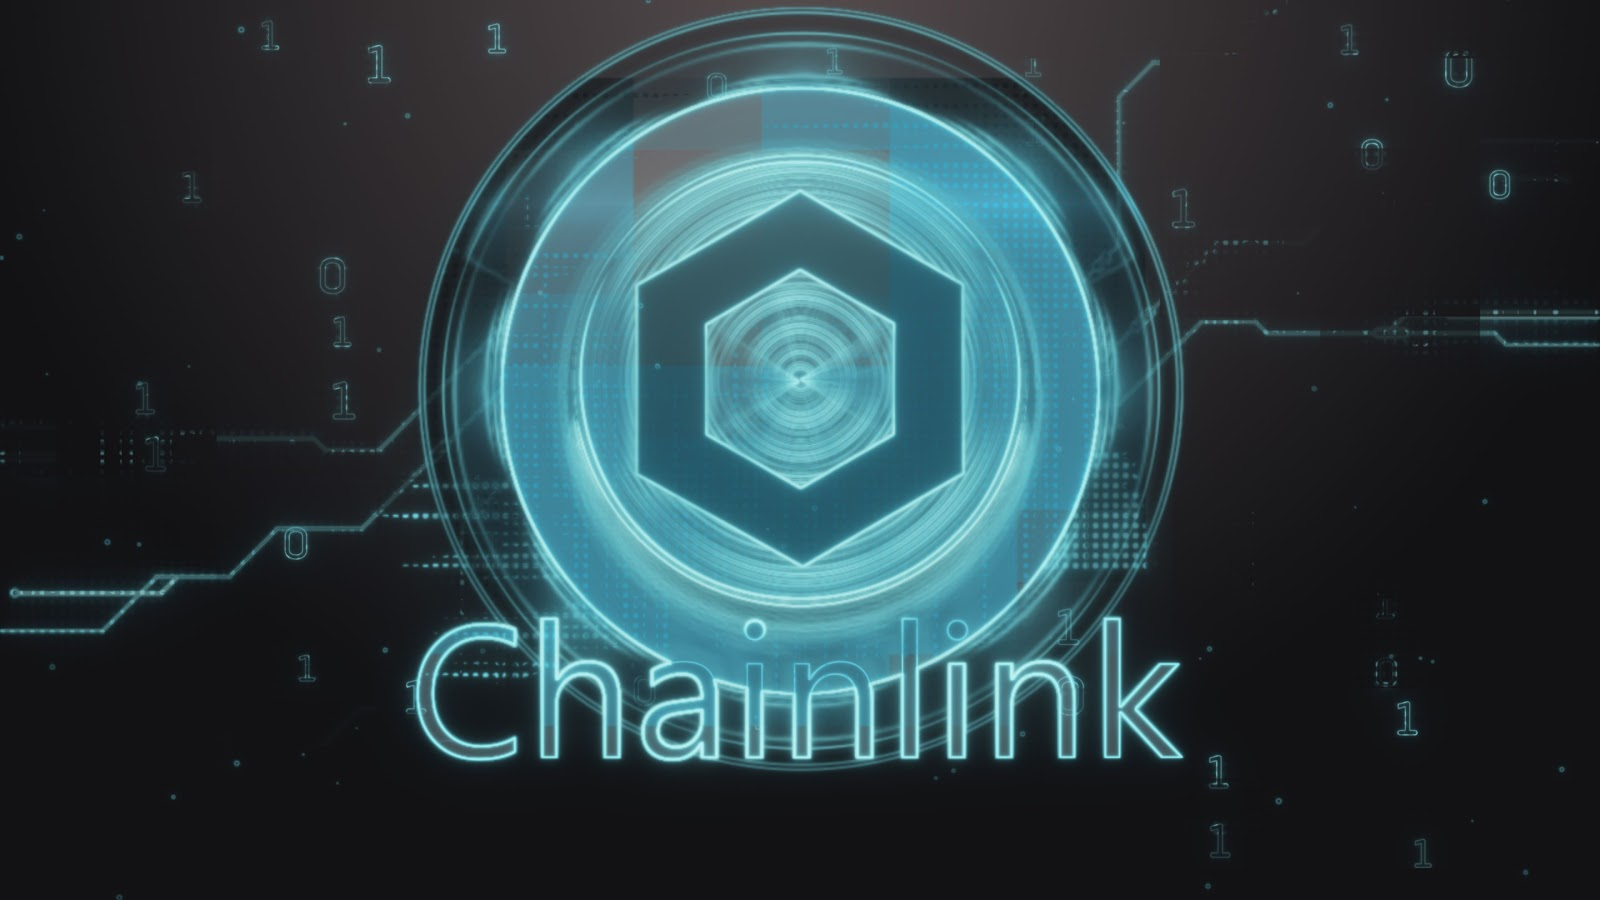 Chainlink Staking Program Quickly Attracts $600M and Two Other Top Altcoins Leading the Market Rally